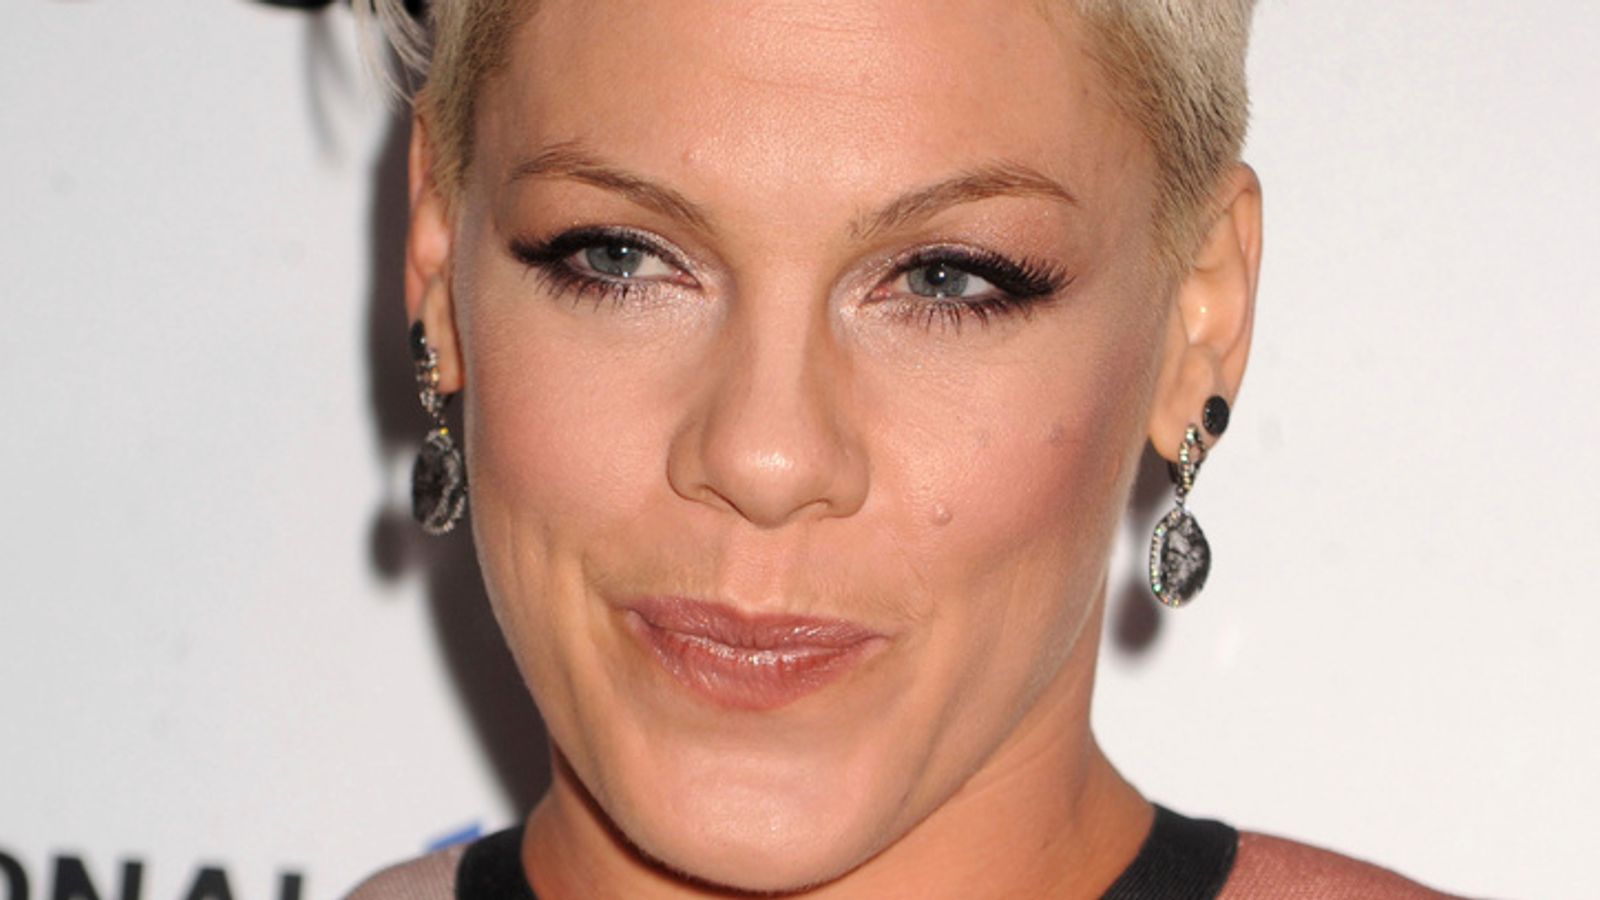 Pink forced to cancel concerts due to illness